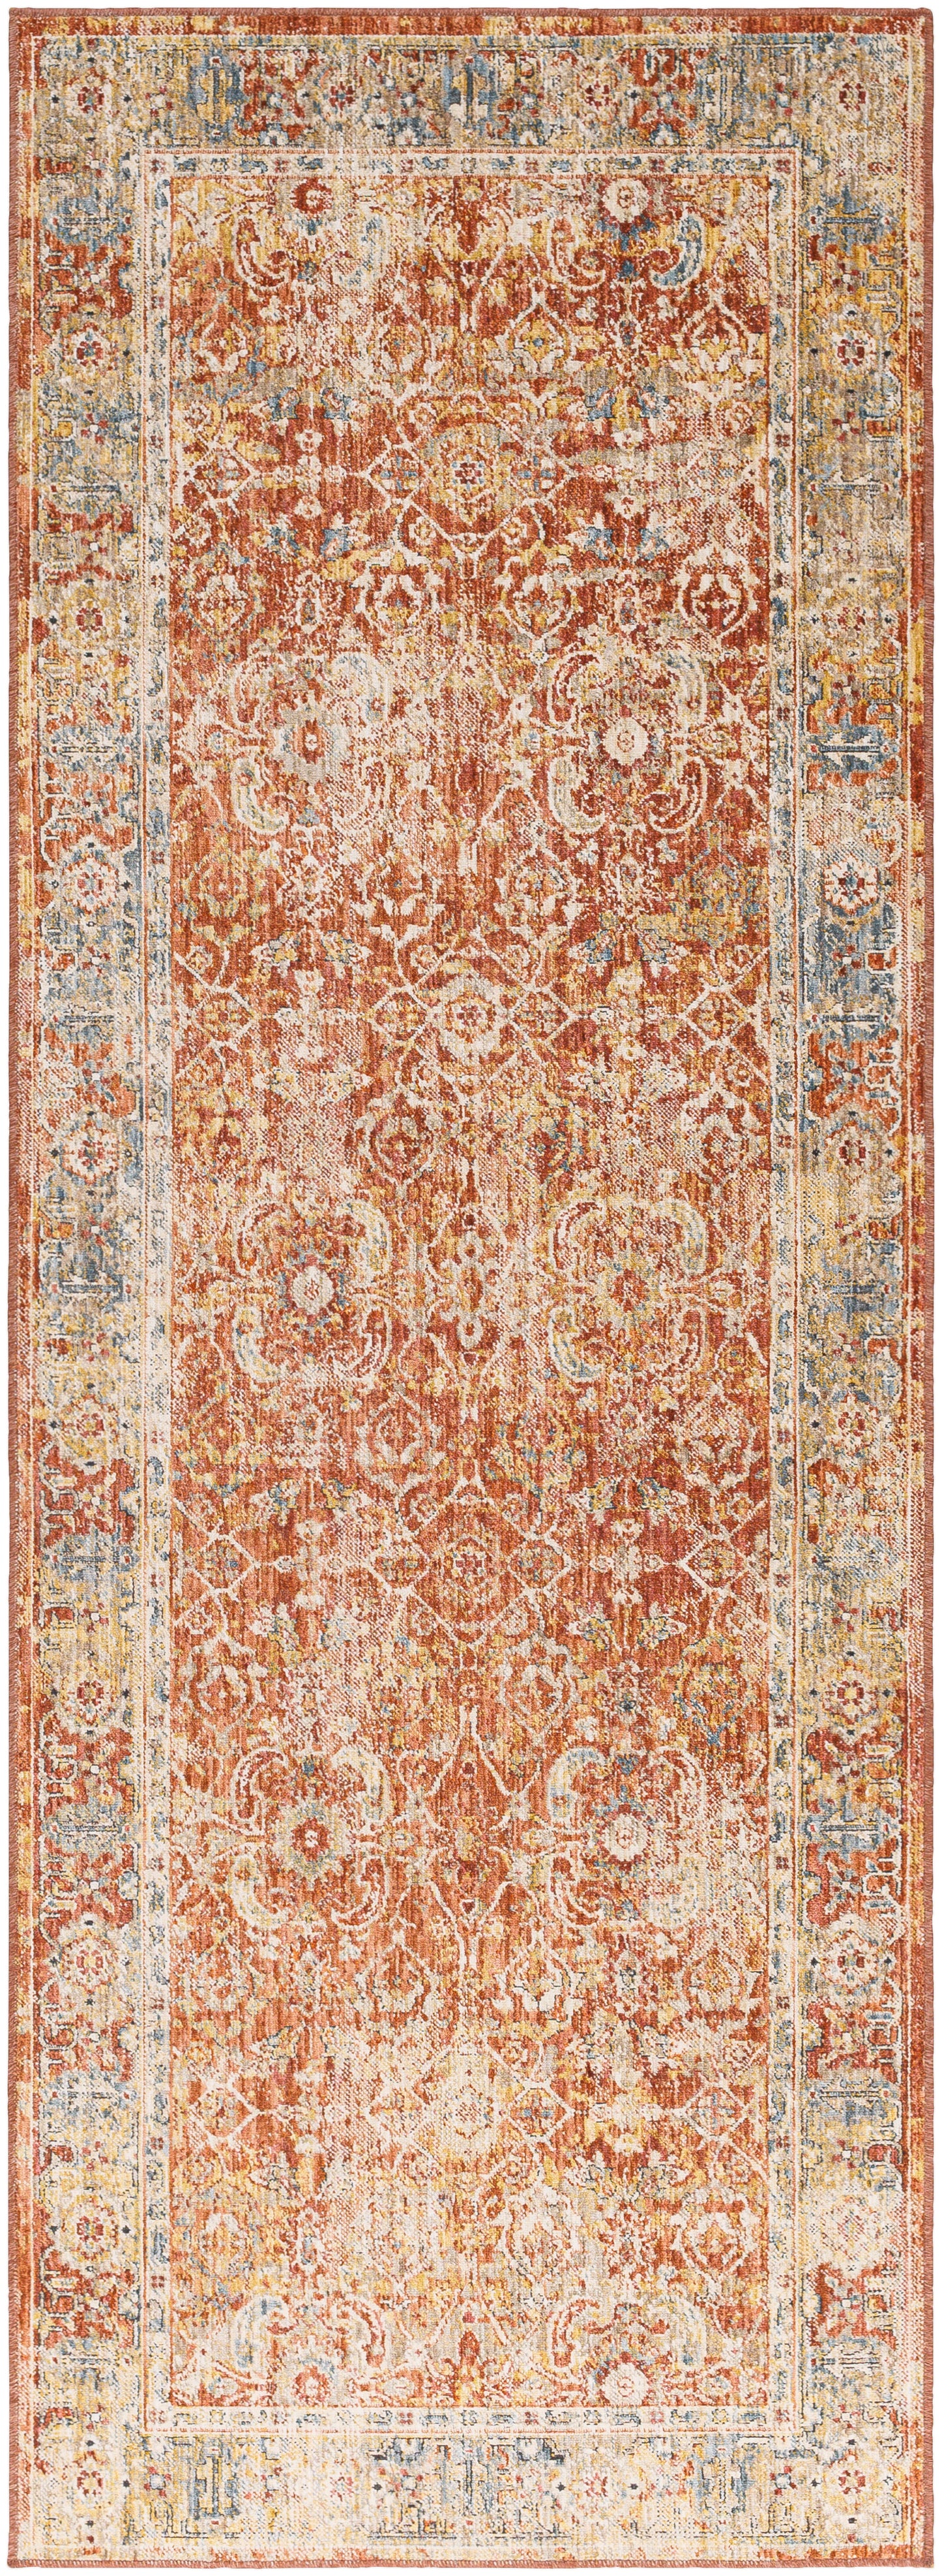 Aspendos 30437 Machine Woven Synthetic Blend Indoor Area Rug by Surya Rugs